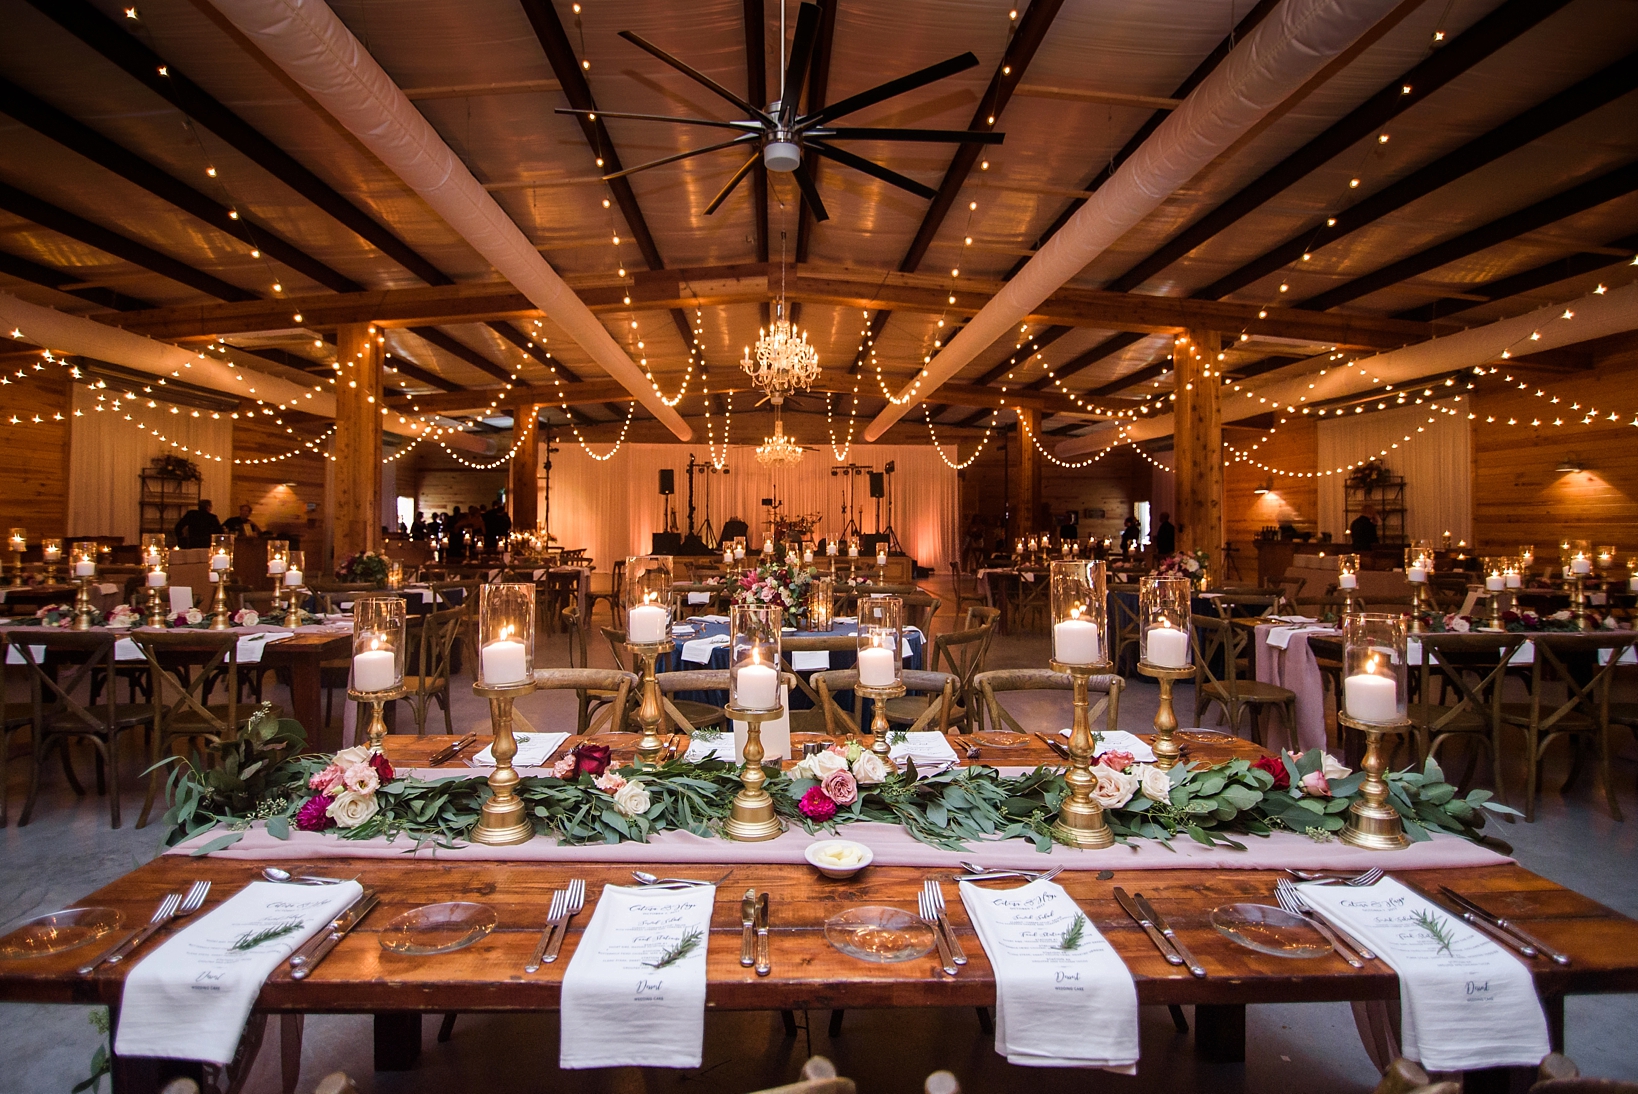 Linen printed menus along a farm table surrounded by glow lights